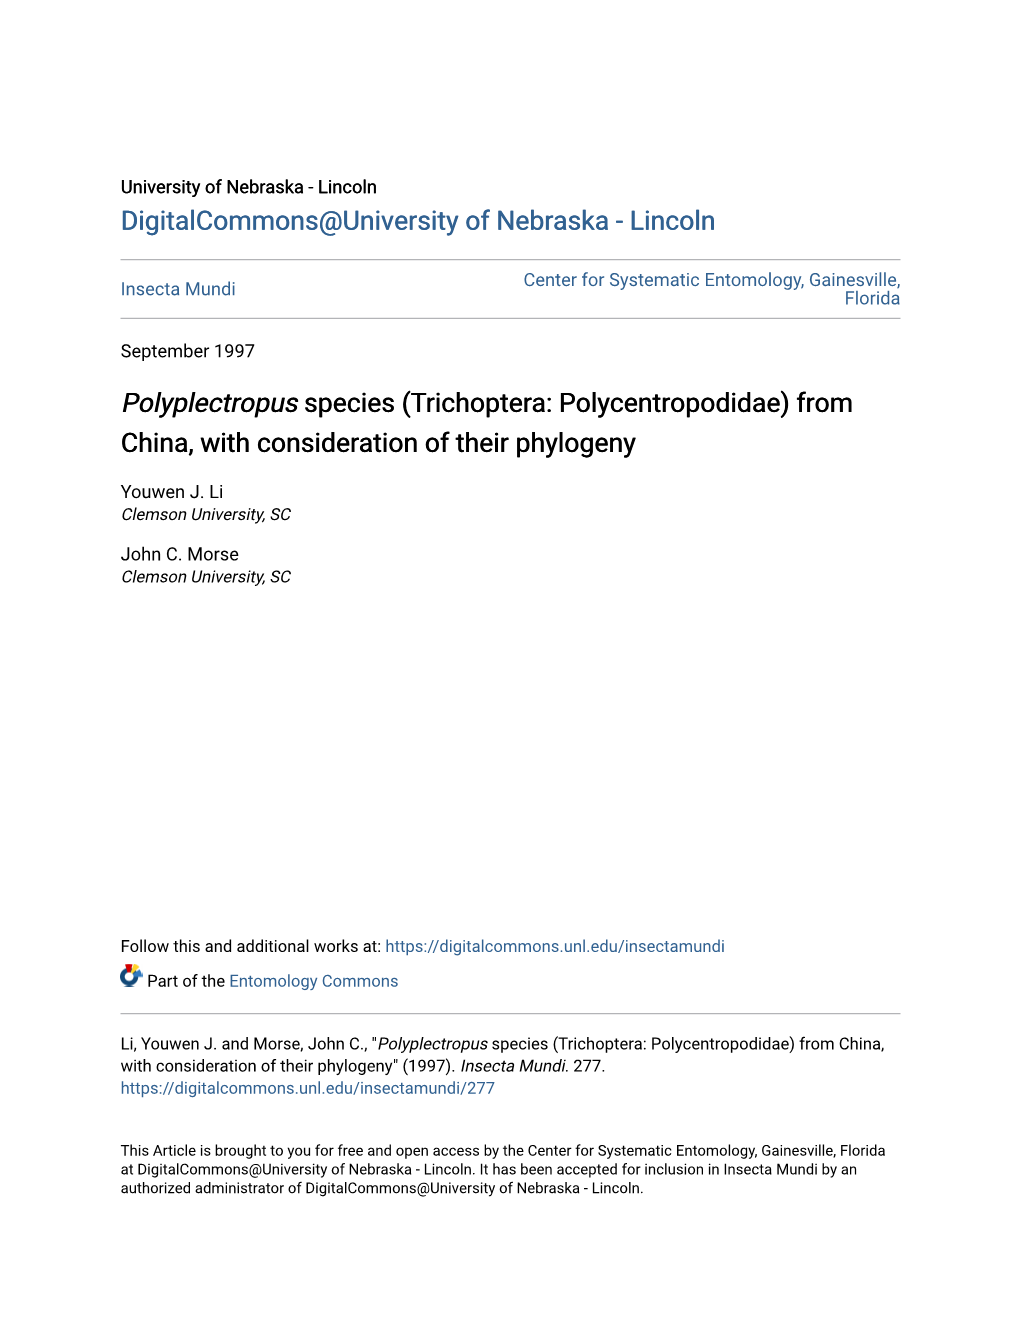 Trichoptera: Polycentropodidae) from China, with Consideration of Their Phylogeny